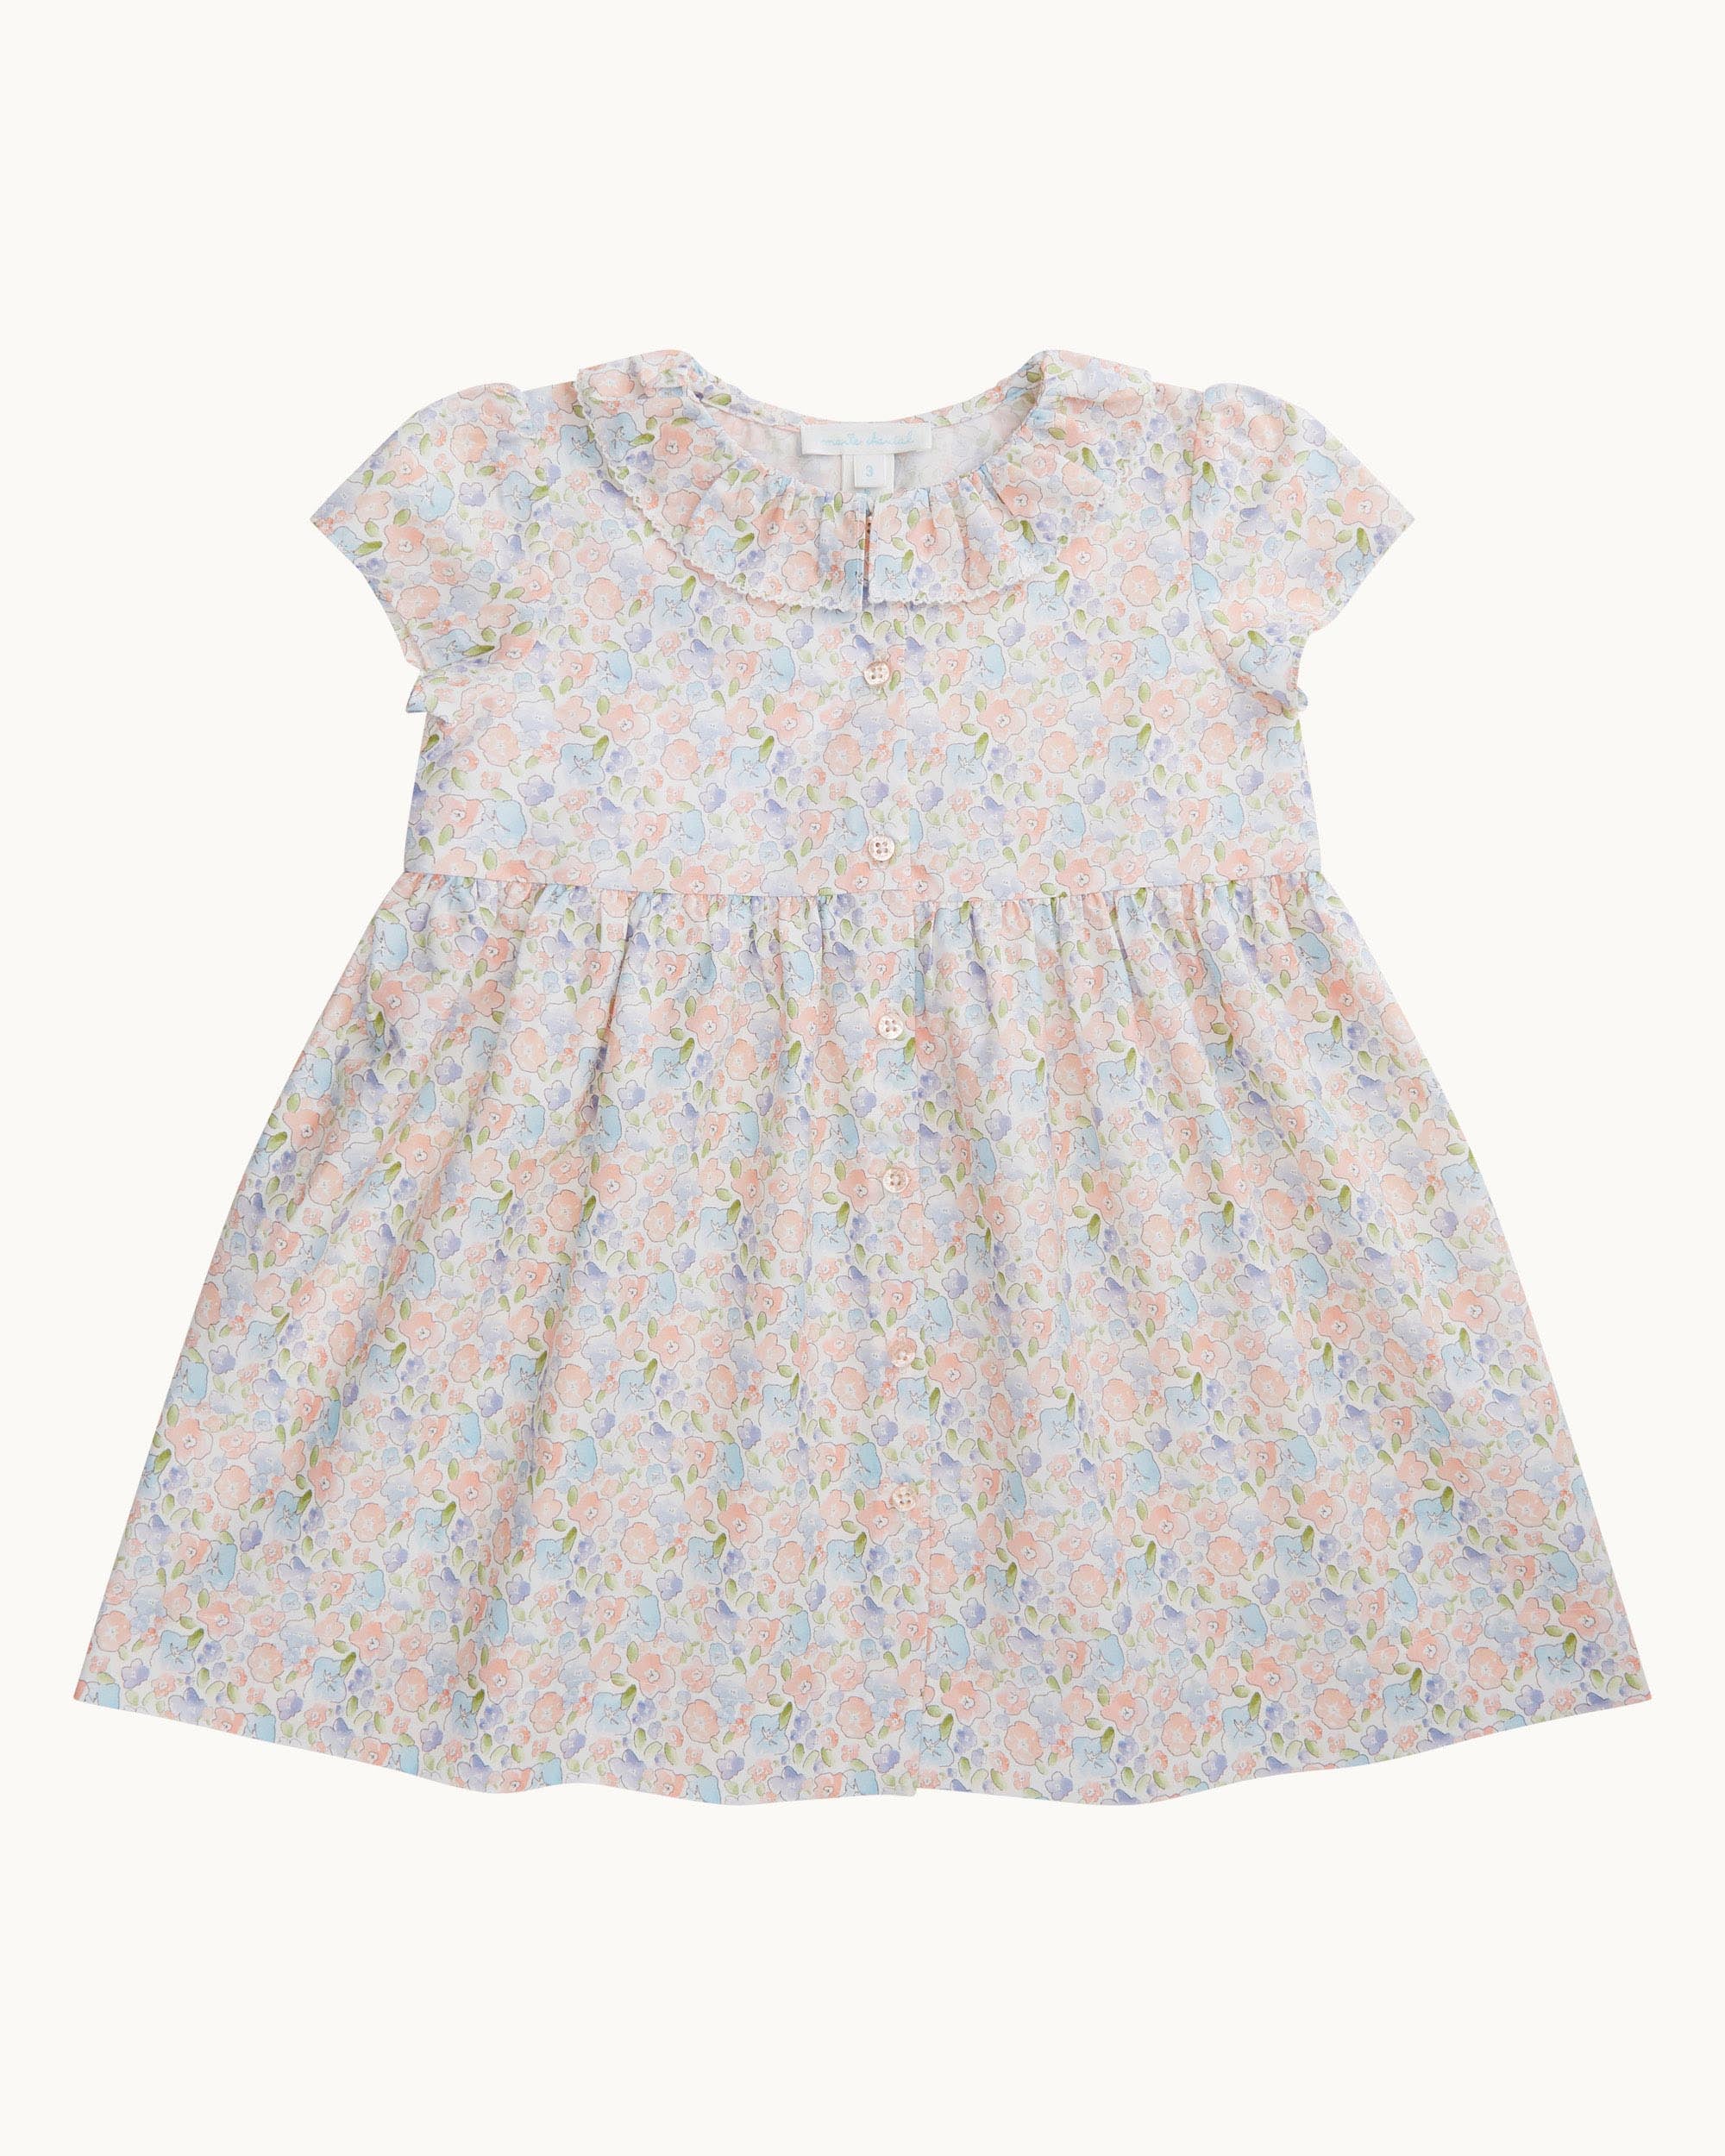 Olympia Spring Floral Dress - Child